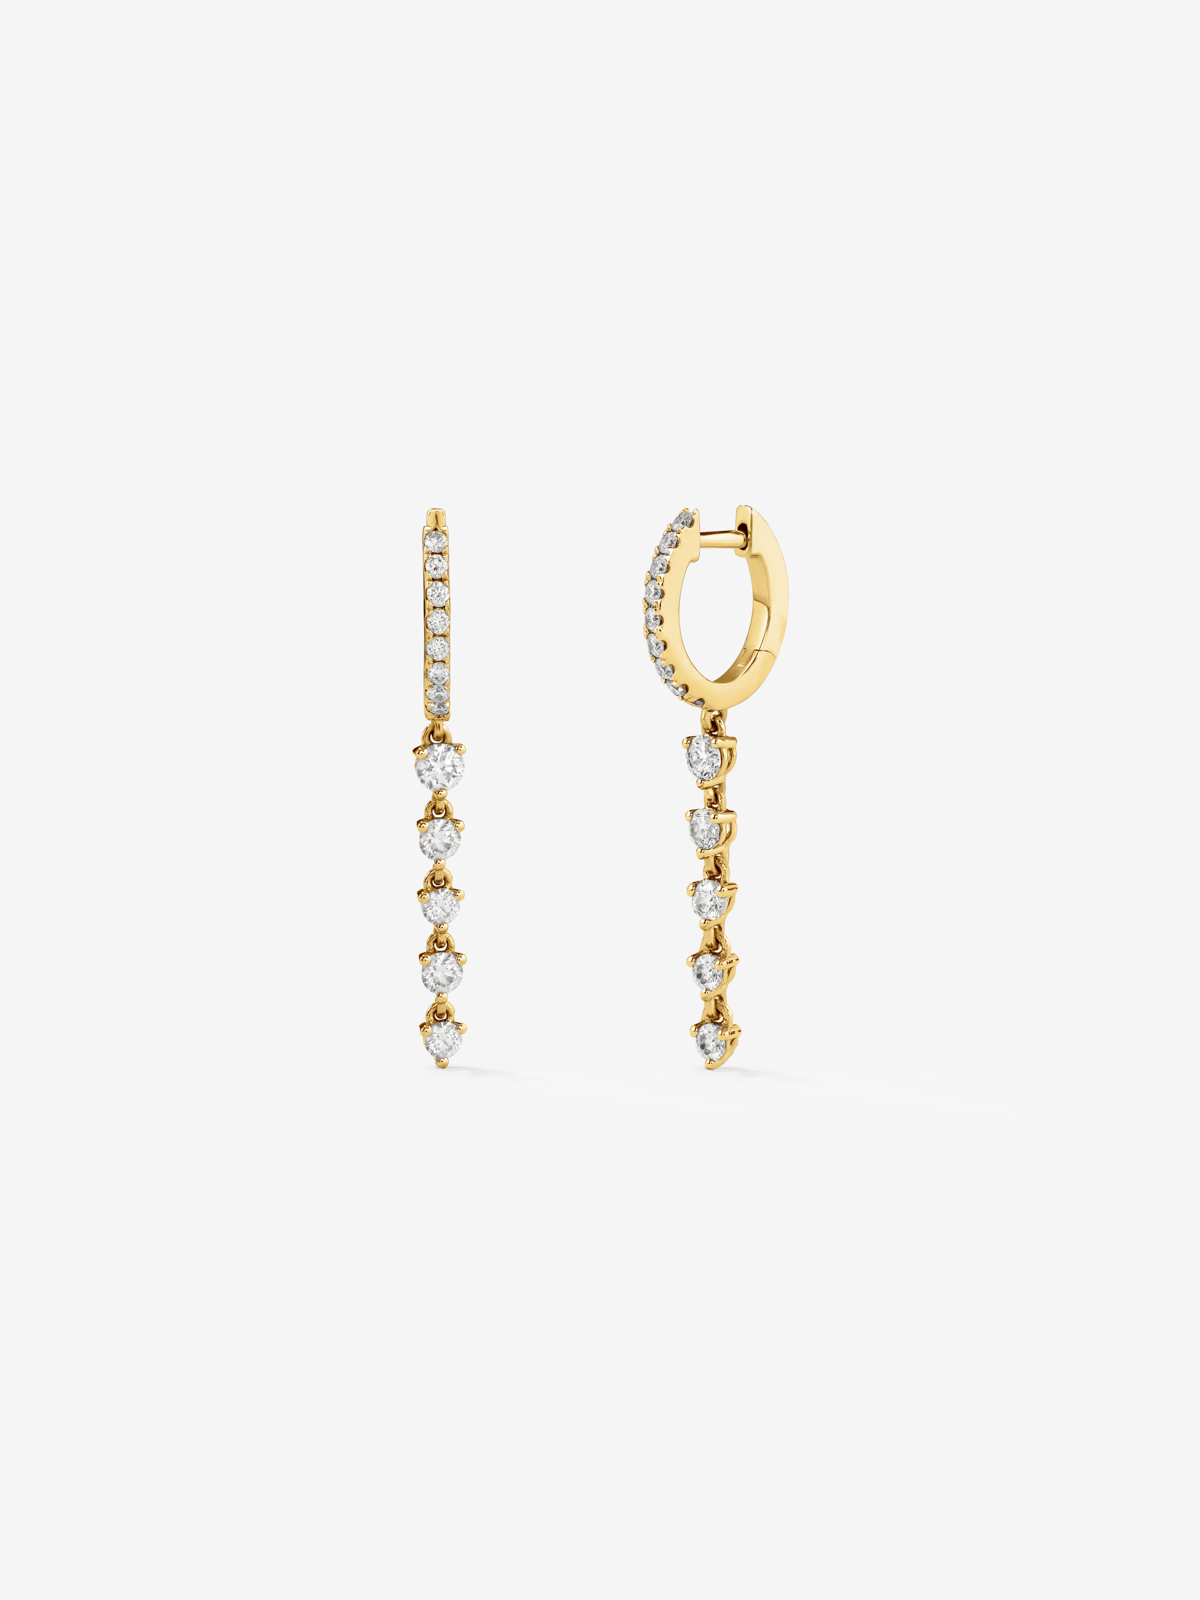 18K yellow gold earrings with white diamonds of 1.09 cts